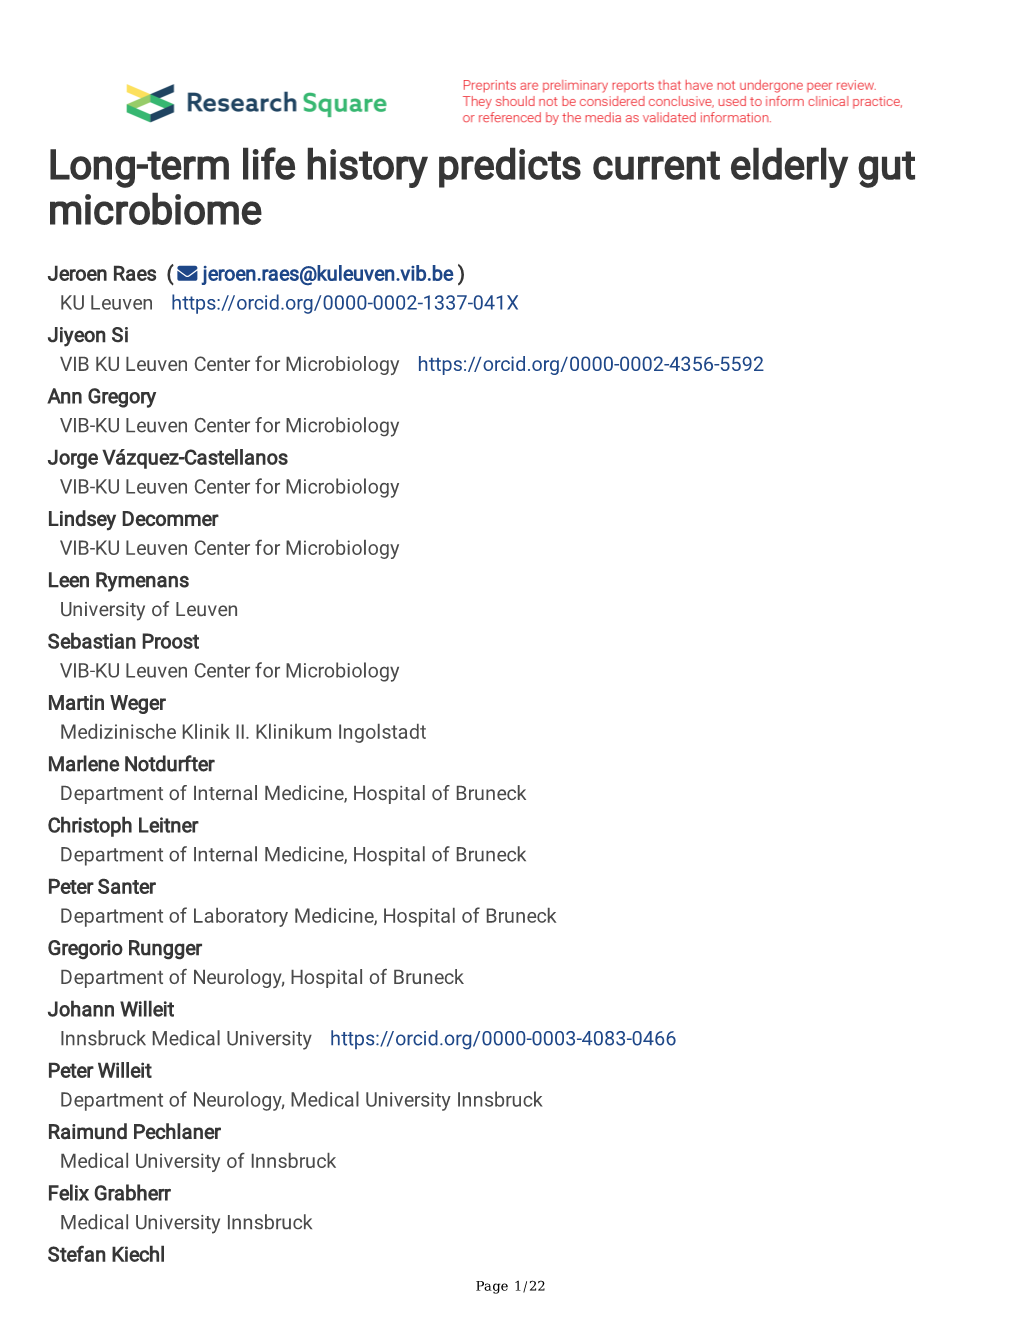 Long-Term Life History Predicts Current Elderly Gut Microbiome